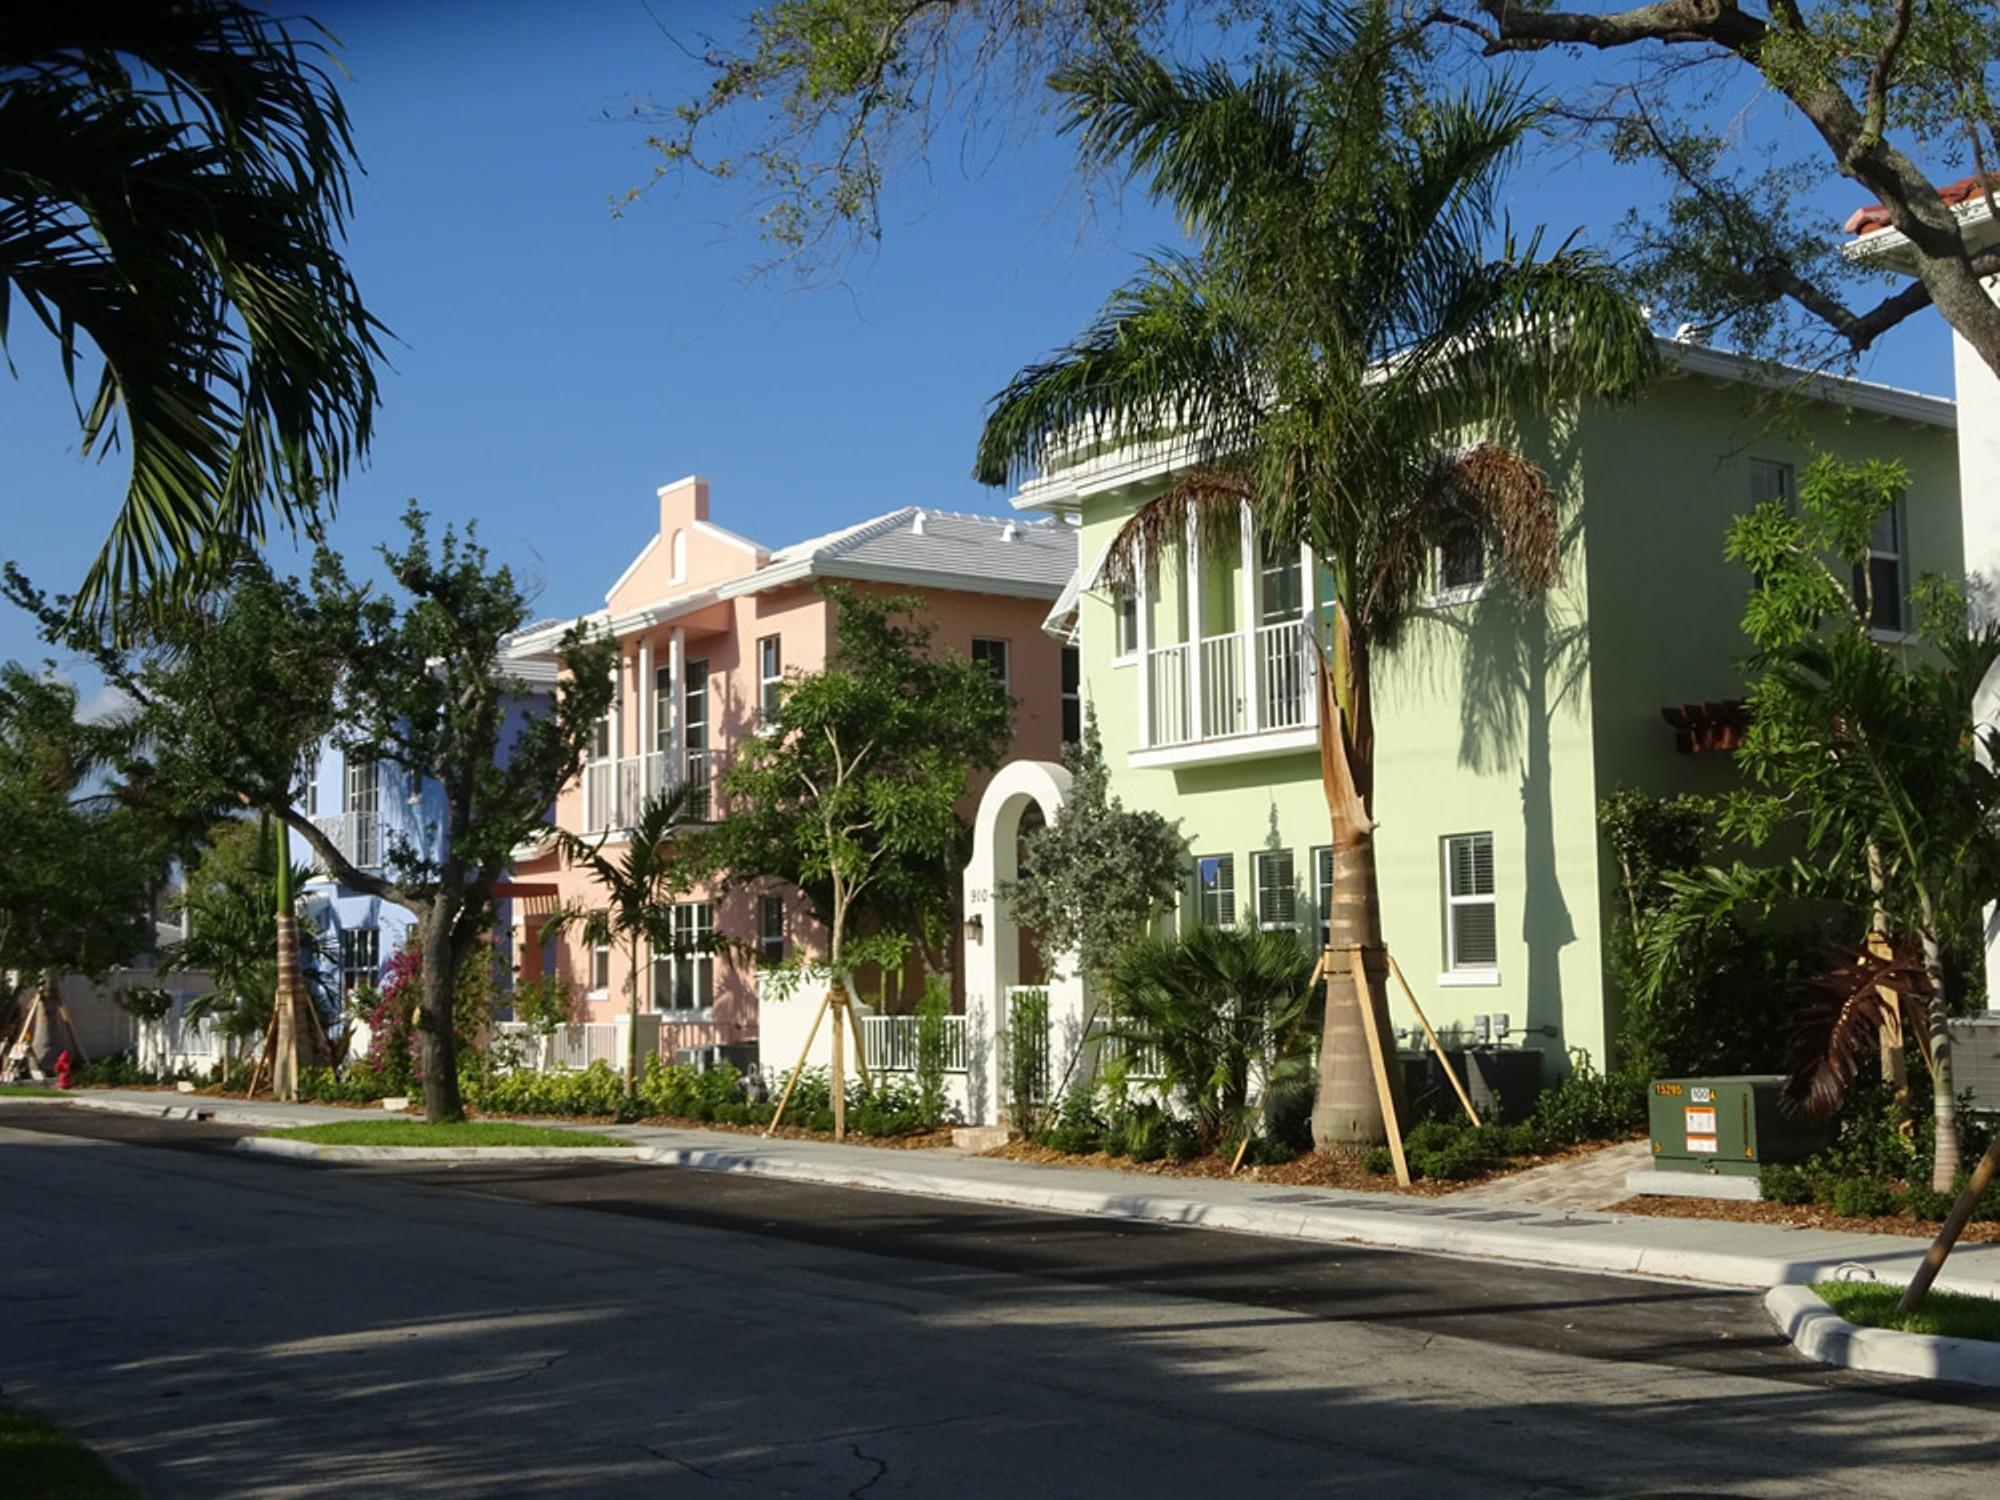 The Village at Victoria Park near downtown Fort Lauderdale